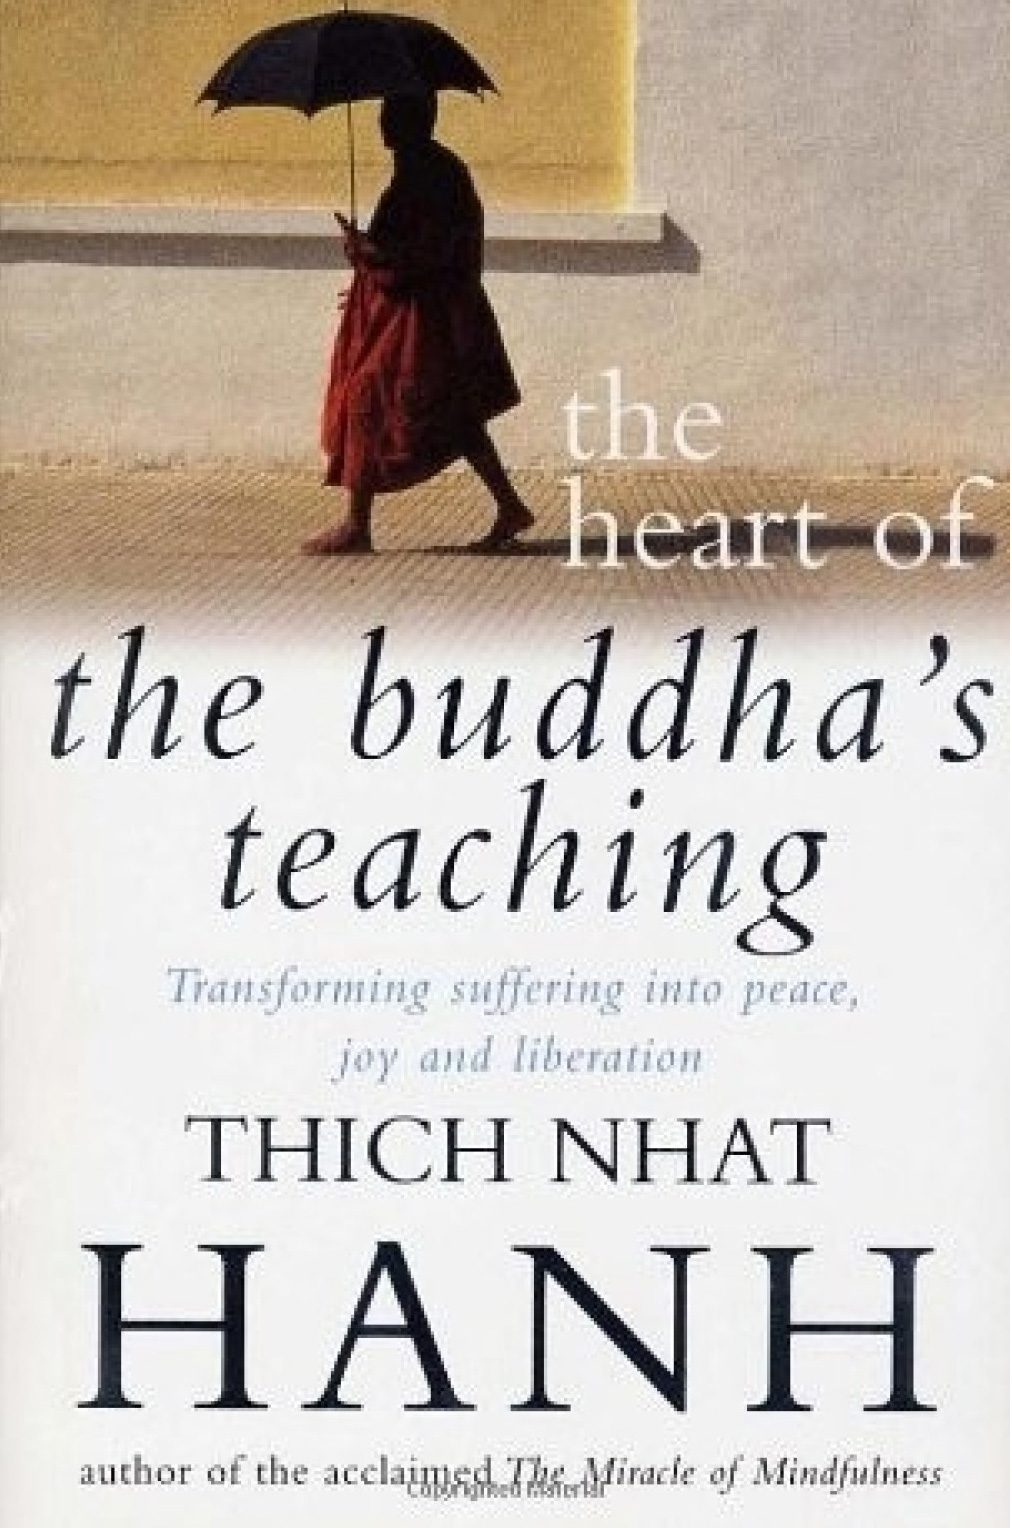 The Heart of the Buddha's Teaching: Transforming Suffering into Peace, Joy, and Liberation by Thich Nhat Hanh